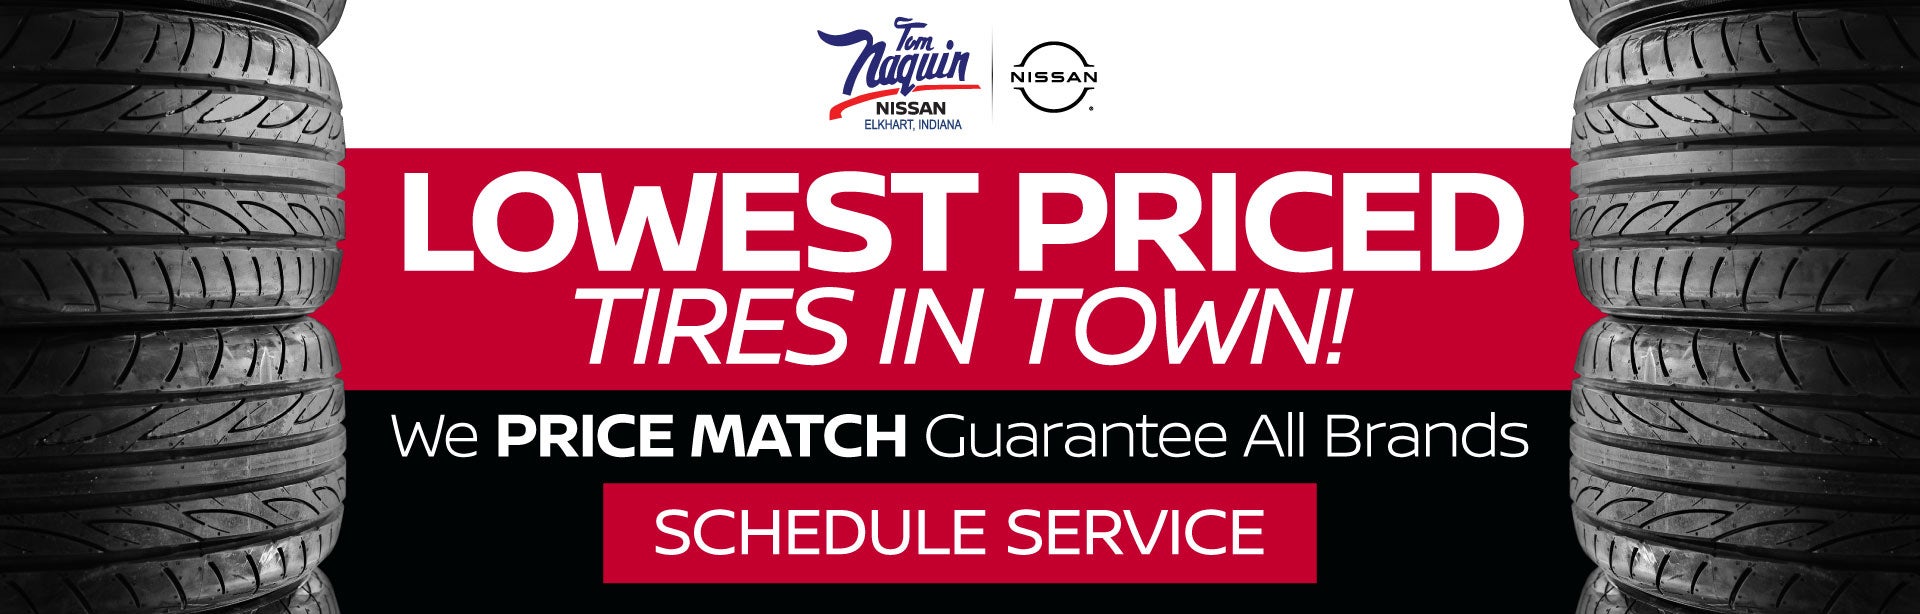 Lowest Priced Tires in Town! We Price Match Guarantee